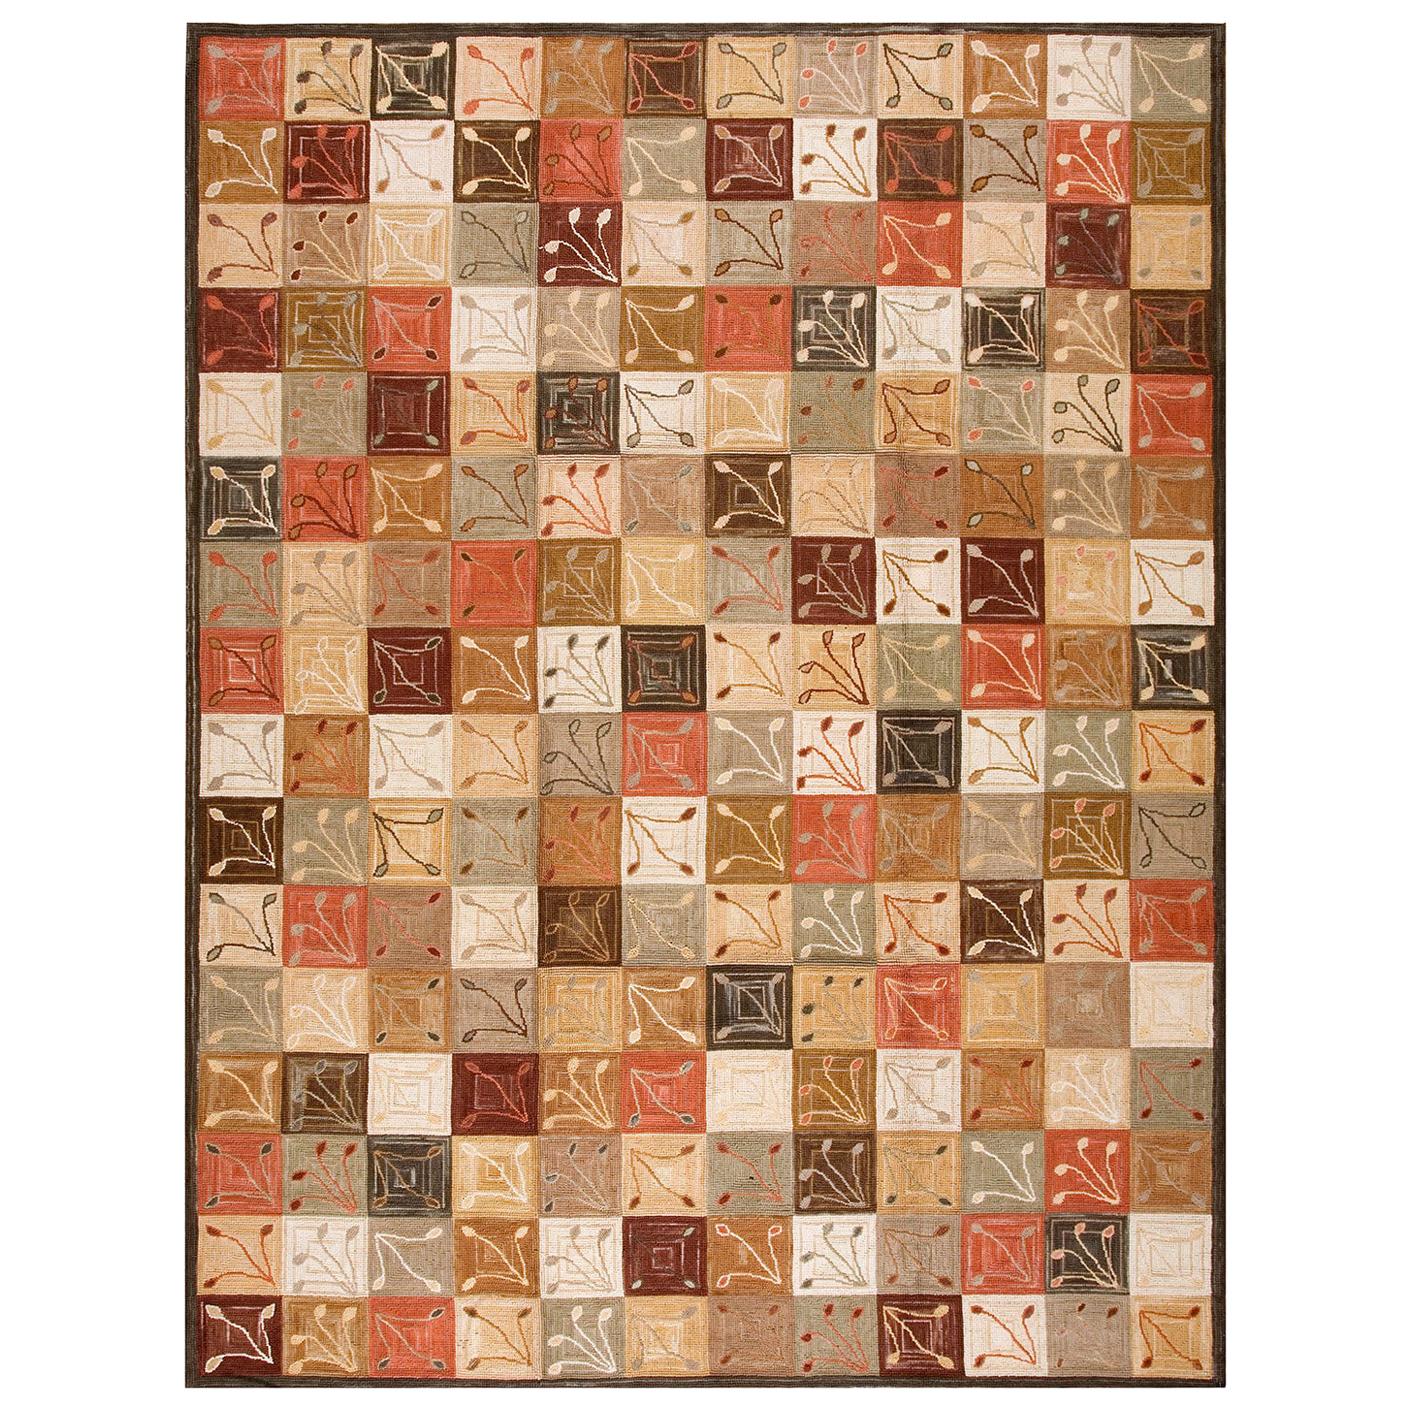 Contemporary American Hooked Rug (8' x 10' - 244x 305 ) For Sale